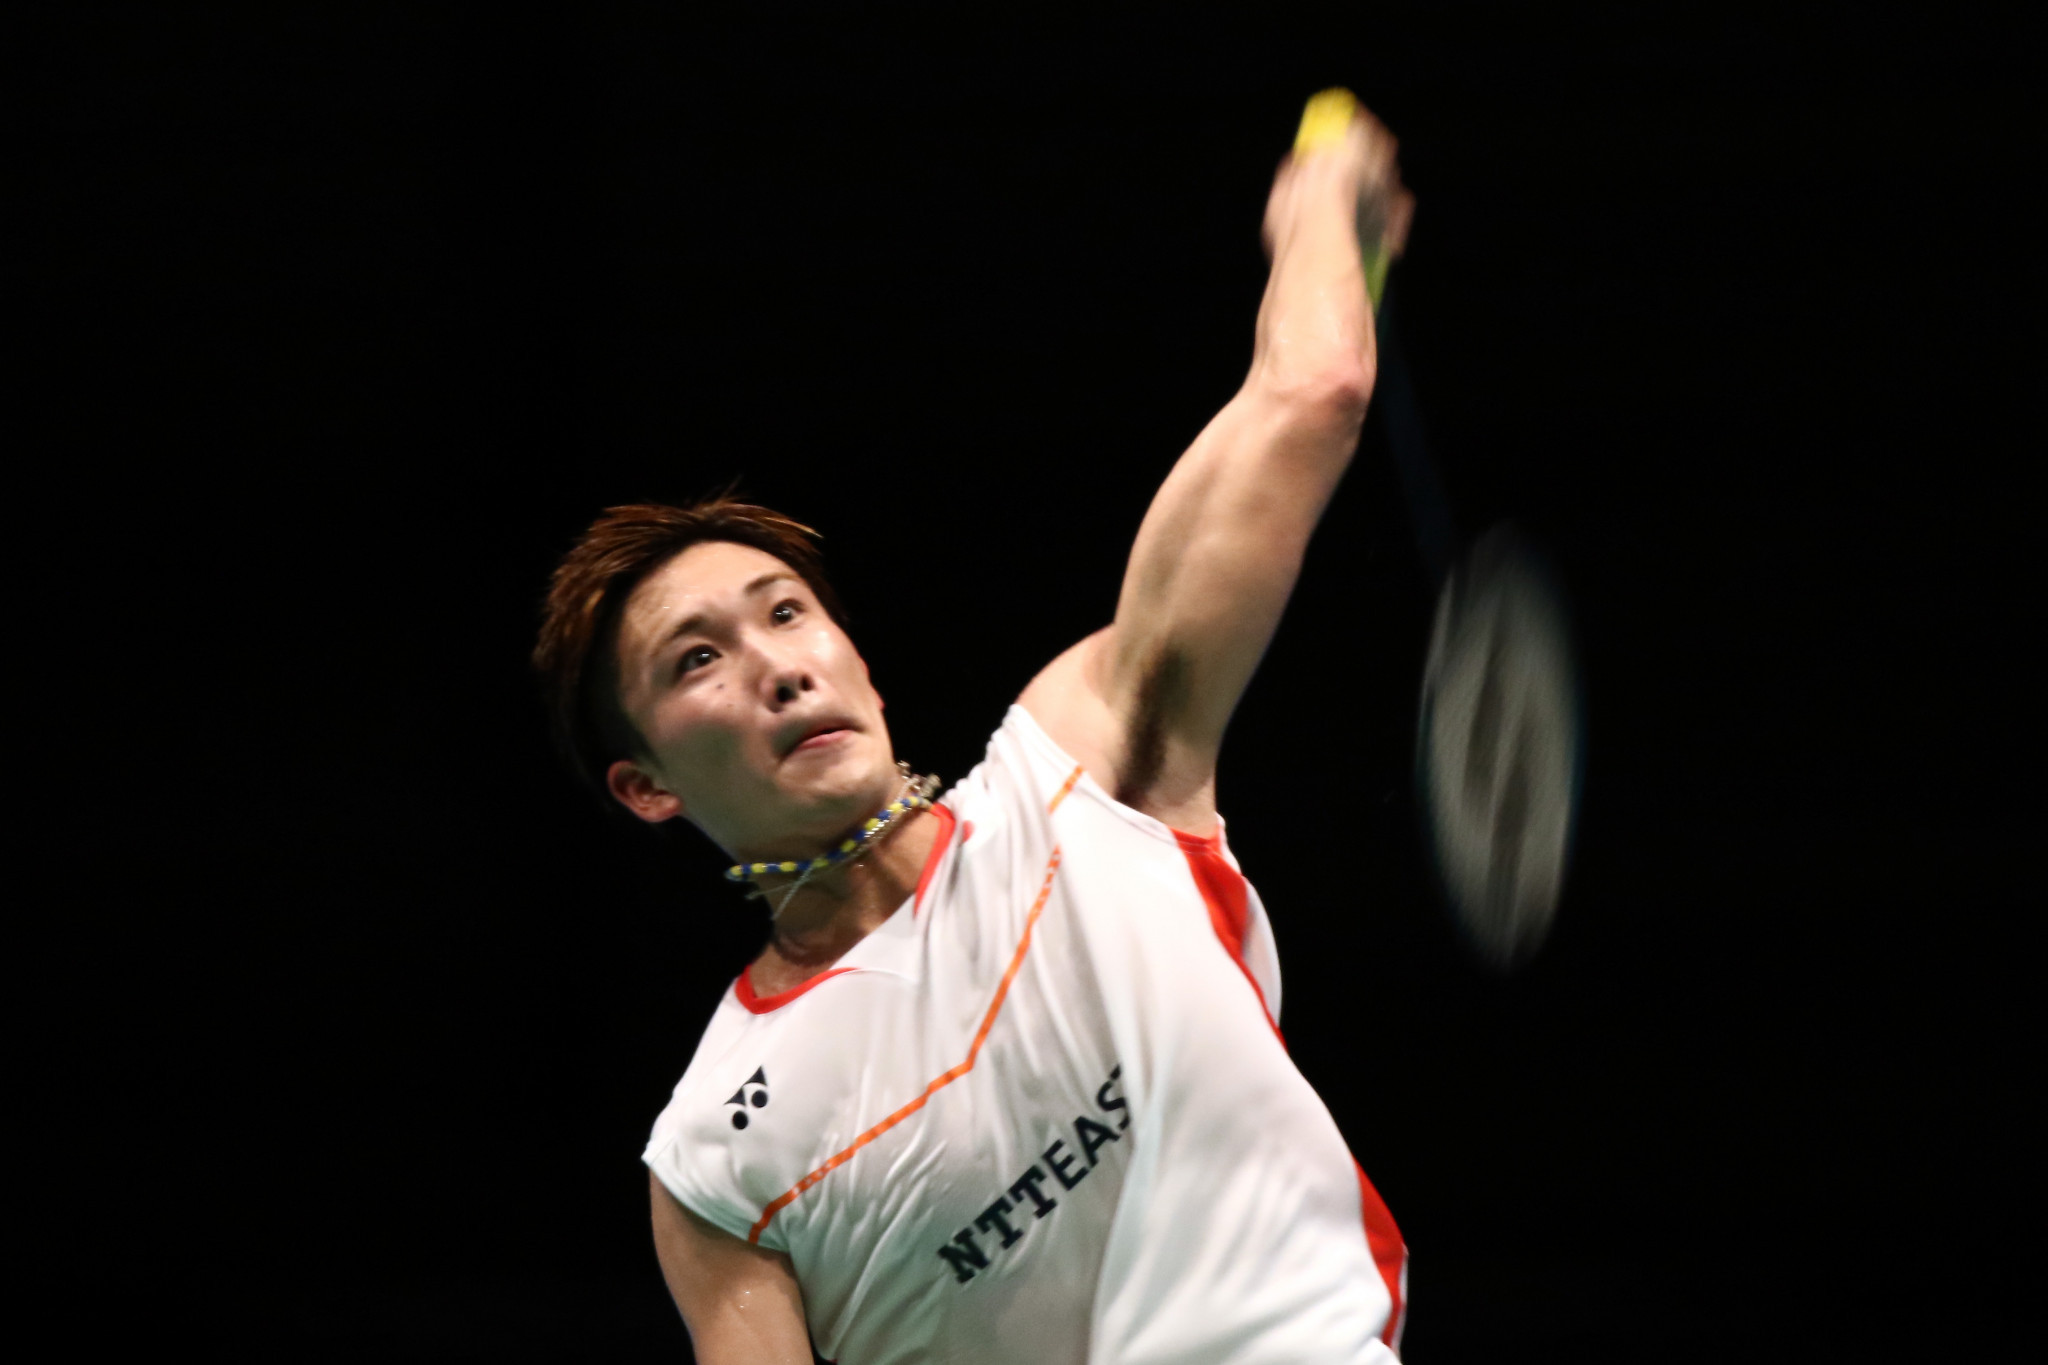 Kento Momota reached the men's singles final in Macau ©Getty Images